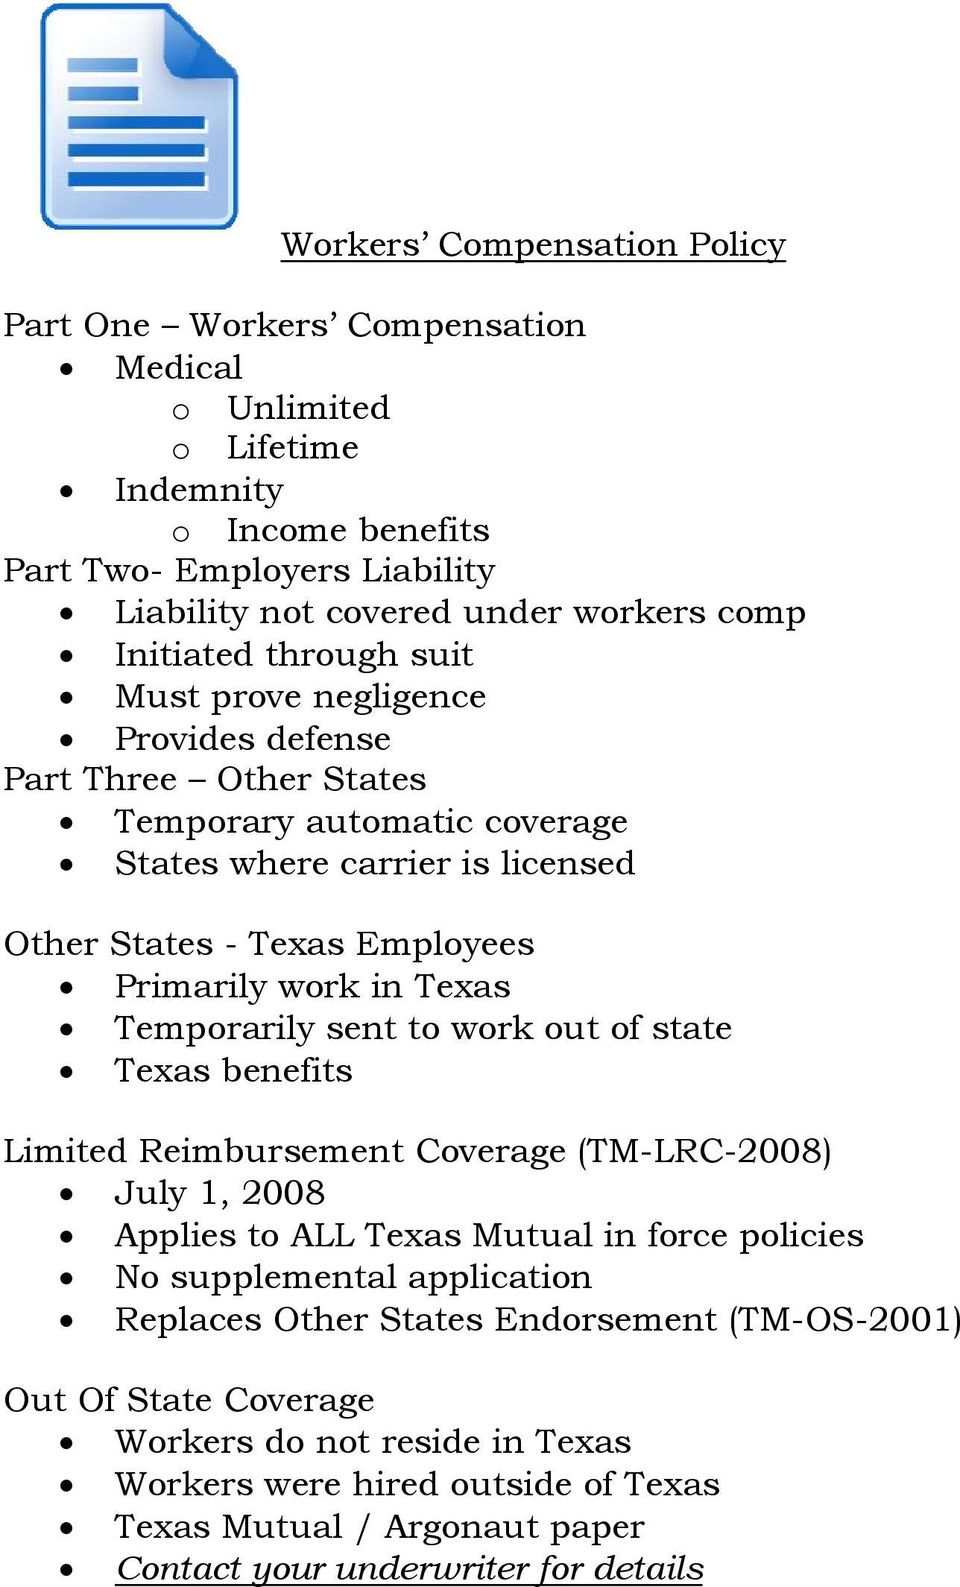 in Texas Temporarily sent to work out of state Texas benefits Limited Reimbursement Coverage (TM-LRC-2008) July 1, 2008 Applies to ALL Texas Mutual in force policies No supplemental application